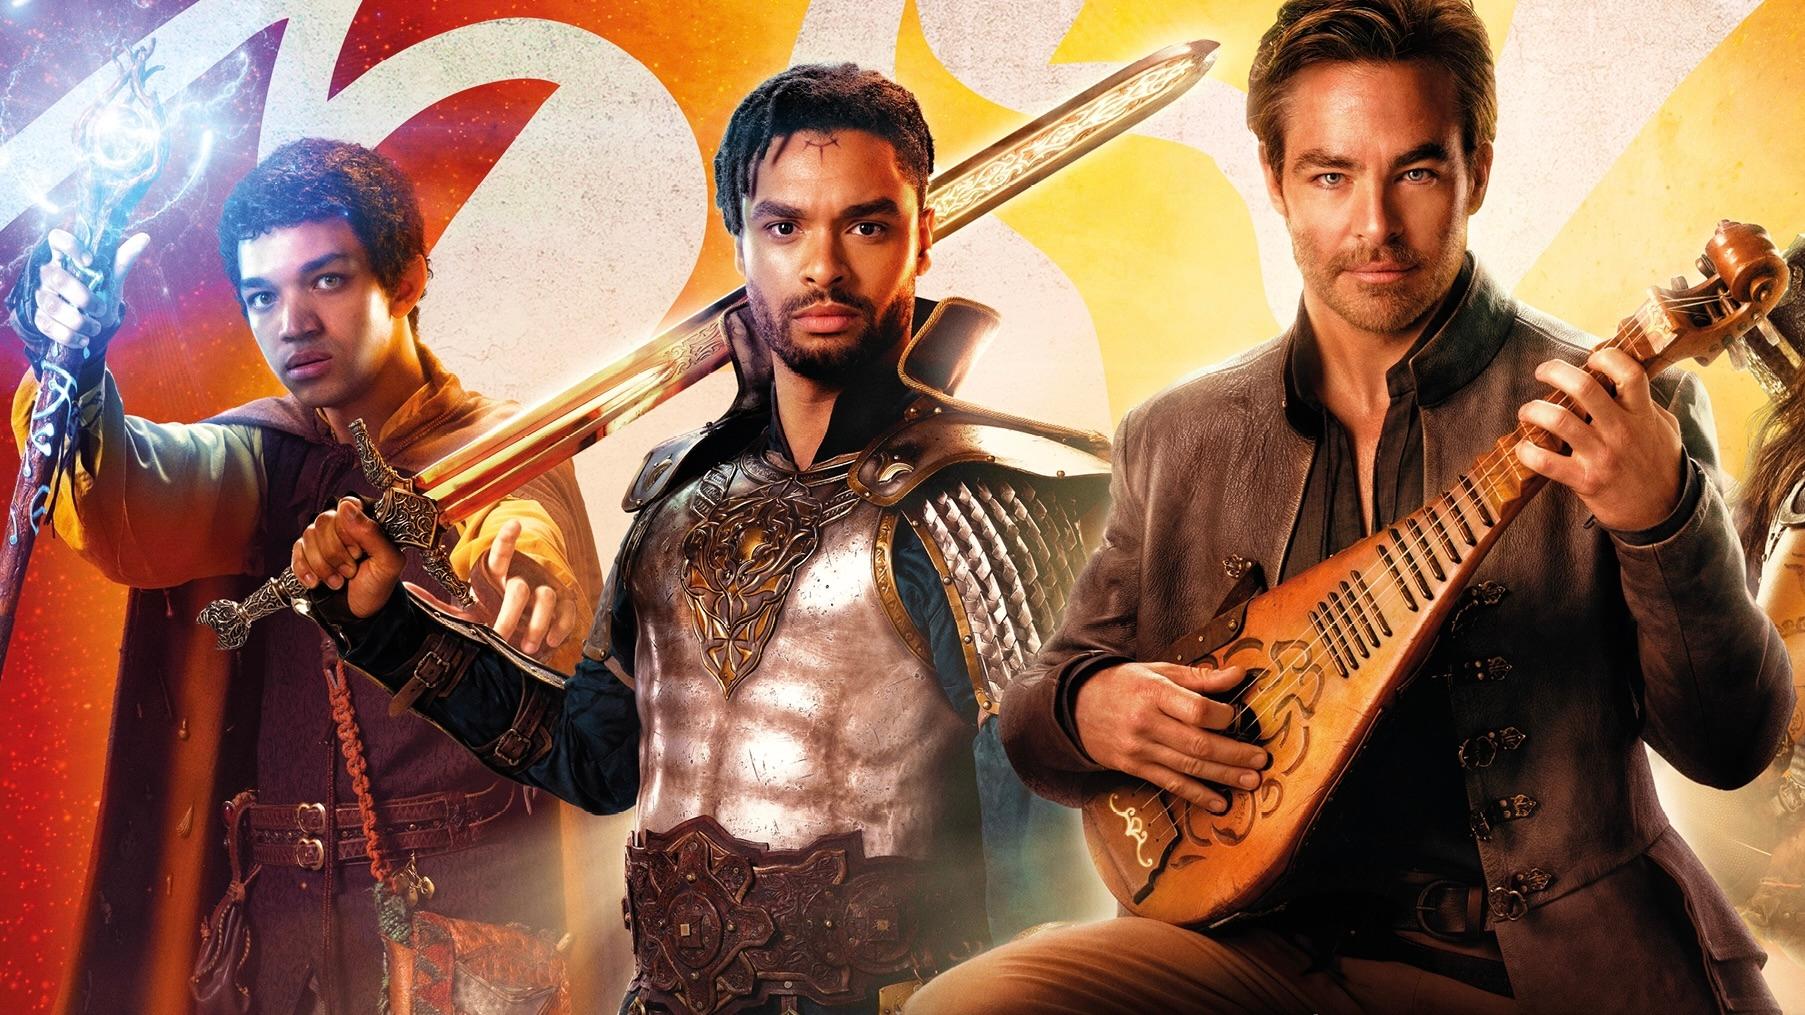 The stars of Dungeons & Dragons: Honor Among Thieves, including Chris Pine.